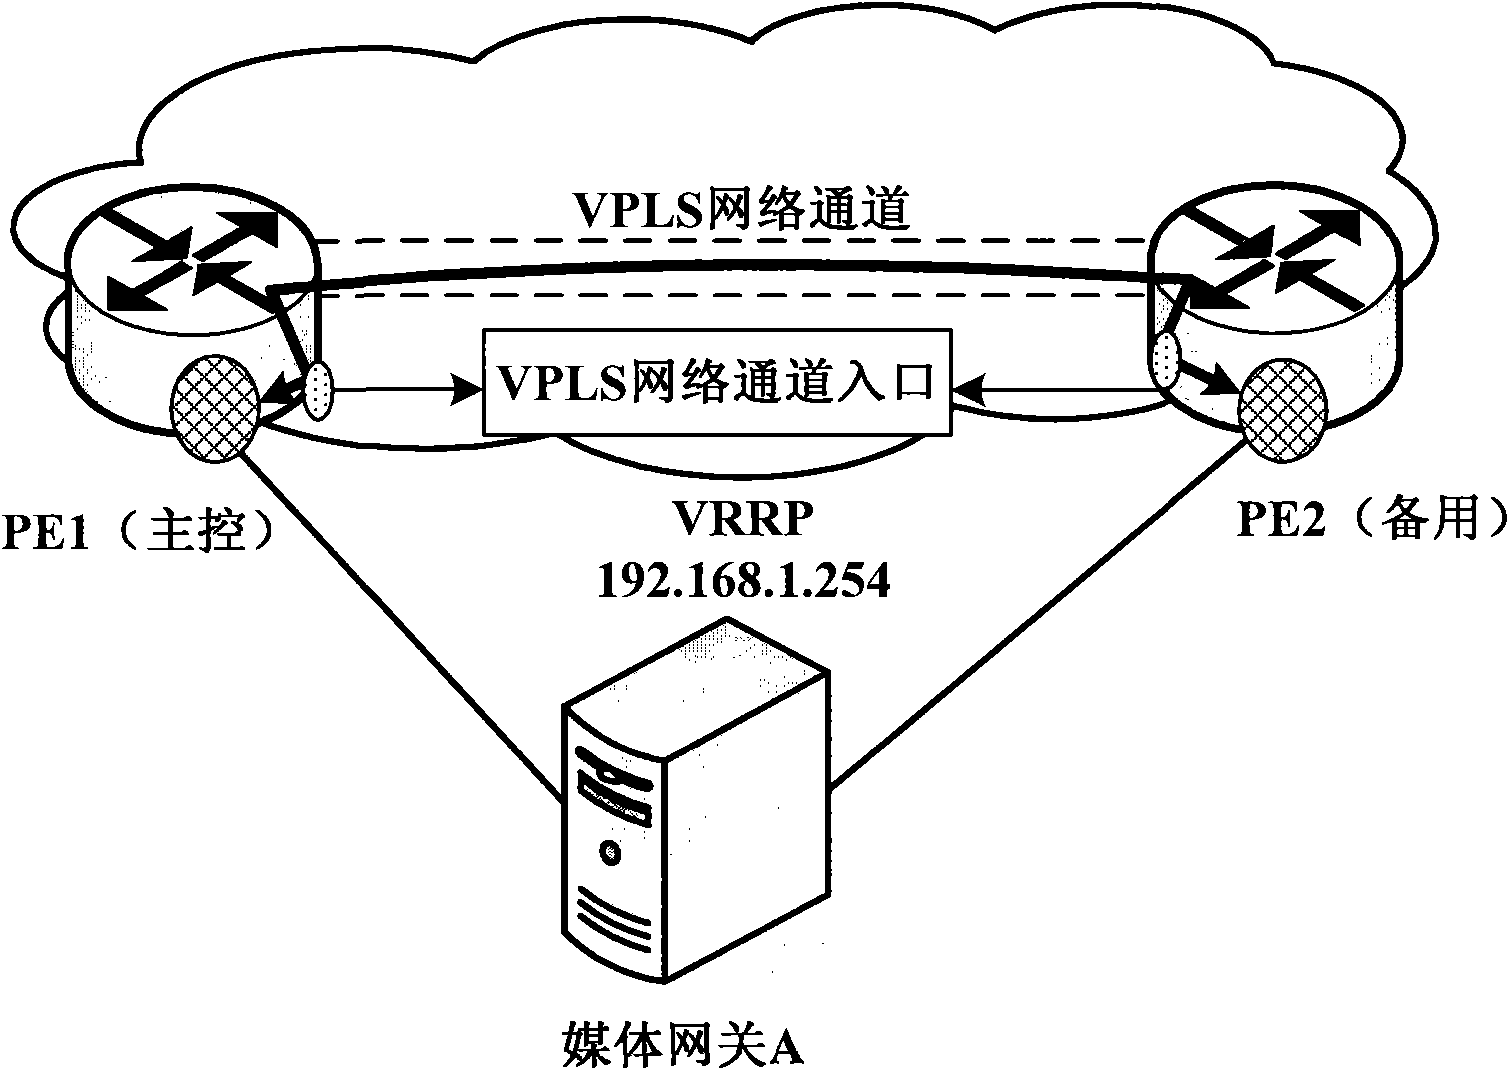 Primary/standby route equipment switching method and route equipment